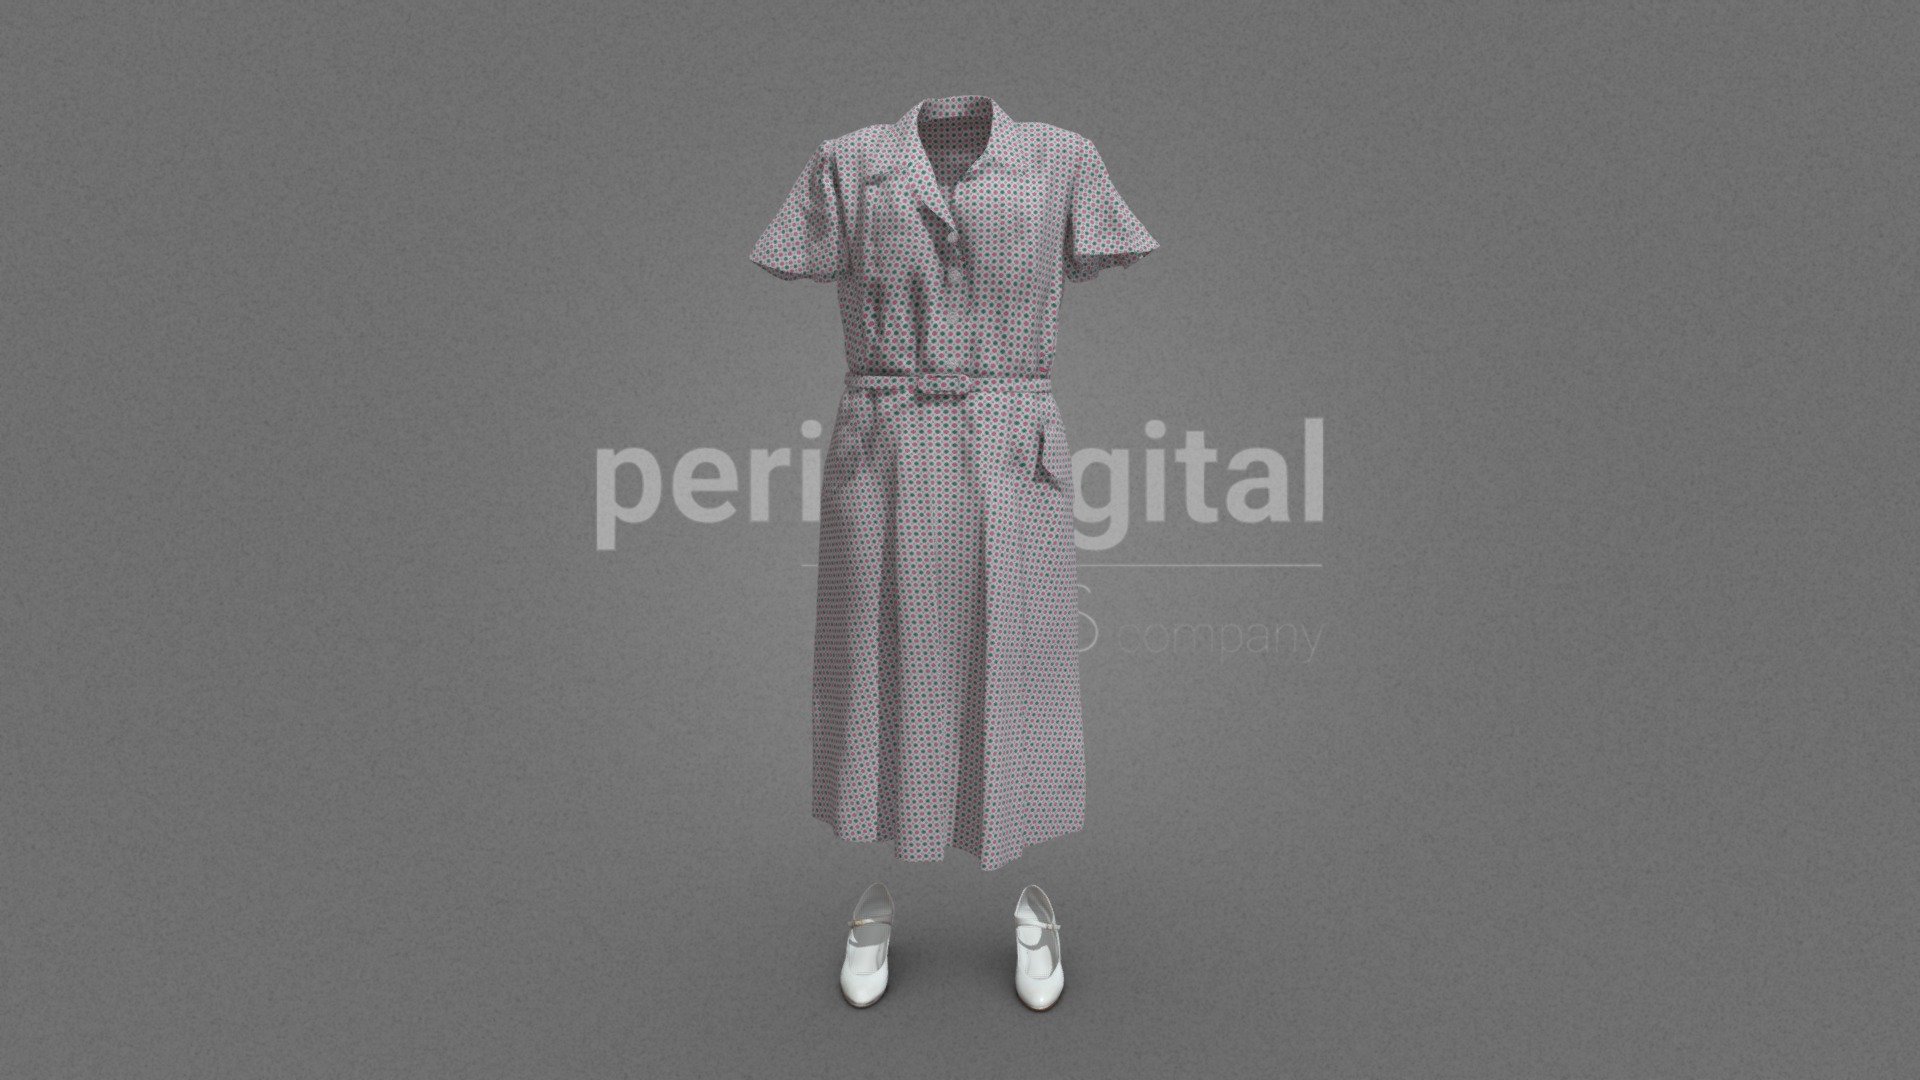 White shirt dress with geometric print in shades of green and pink, short sleeves, side pockets and belt; white heels with strap on the instep.

Our “40s Fashion” collection consists of several sets, which you can use in your audiovisual creations, extracted and modeled from our catalog of photogrammetry pieces.

They are optimized for use in 3D scenes of medium/high polygonalization and optimized for rendering.

We do not include characters, but they are positioned for you to include and adjust your own character.

They have a model LOW (_LODRIG) inside the Blender file (included in the AdditionalFiles), which you can use for vertex weighting or cloth simulation and thus, make the transfer of vertices or property masks from the LOW to the HIGH** model.

**We have included the texture maps in high resolution, so you can make extreme point of view with your 3D cameras, as well as the Blender file so you can edit any aspect of the set.

Enjoy it.

Web: https://peris.digital/ - 40s Fashion Series - Woman 27 - Buy Royalty Free 3D model by Peris Digital (@perisdigital) 3d model